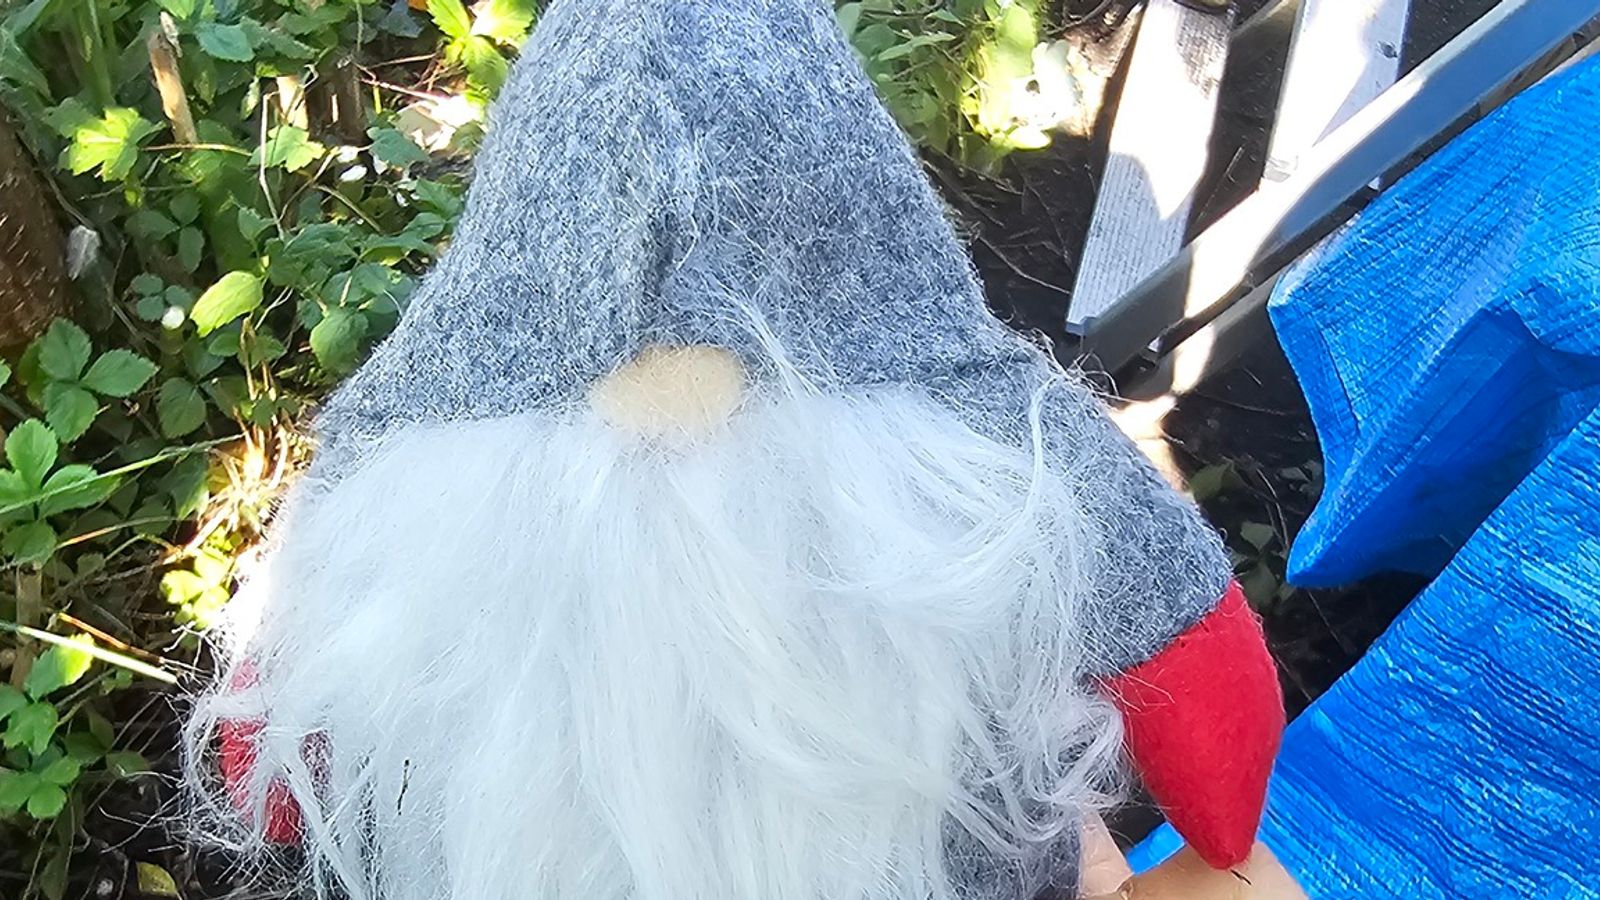 Christmas gnome which police may be 'calling card' for burglars. Pic: North Wales Police